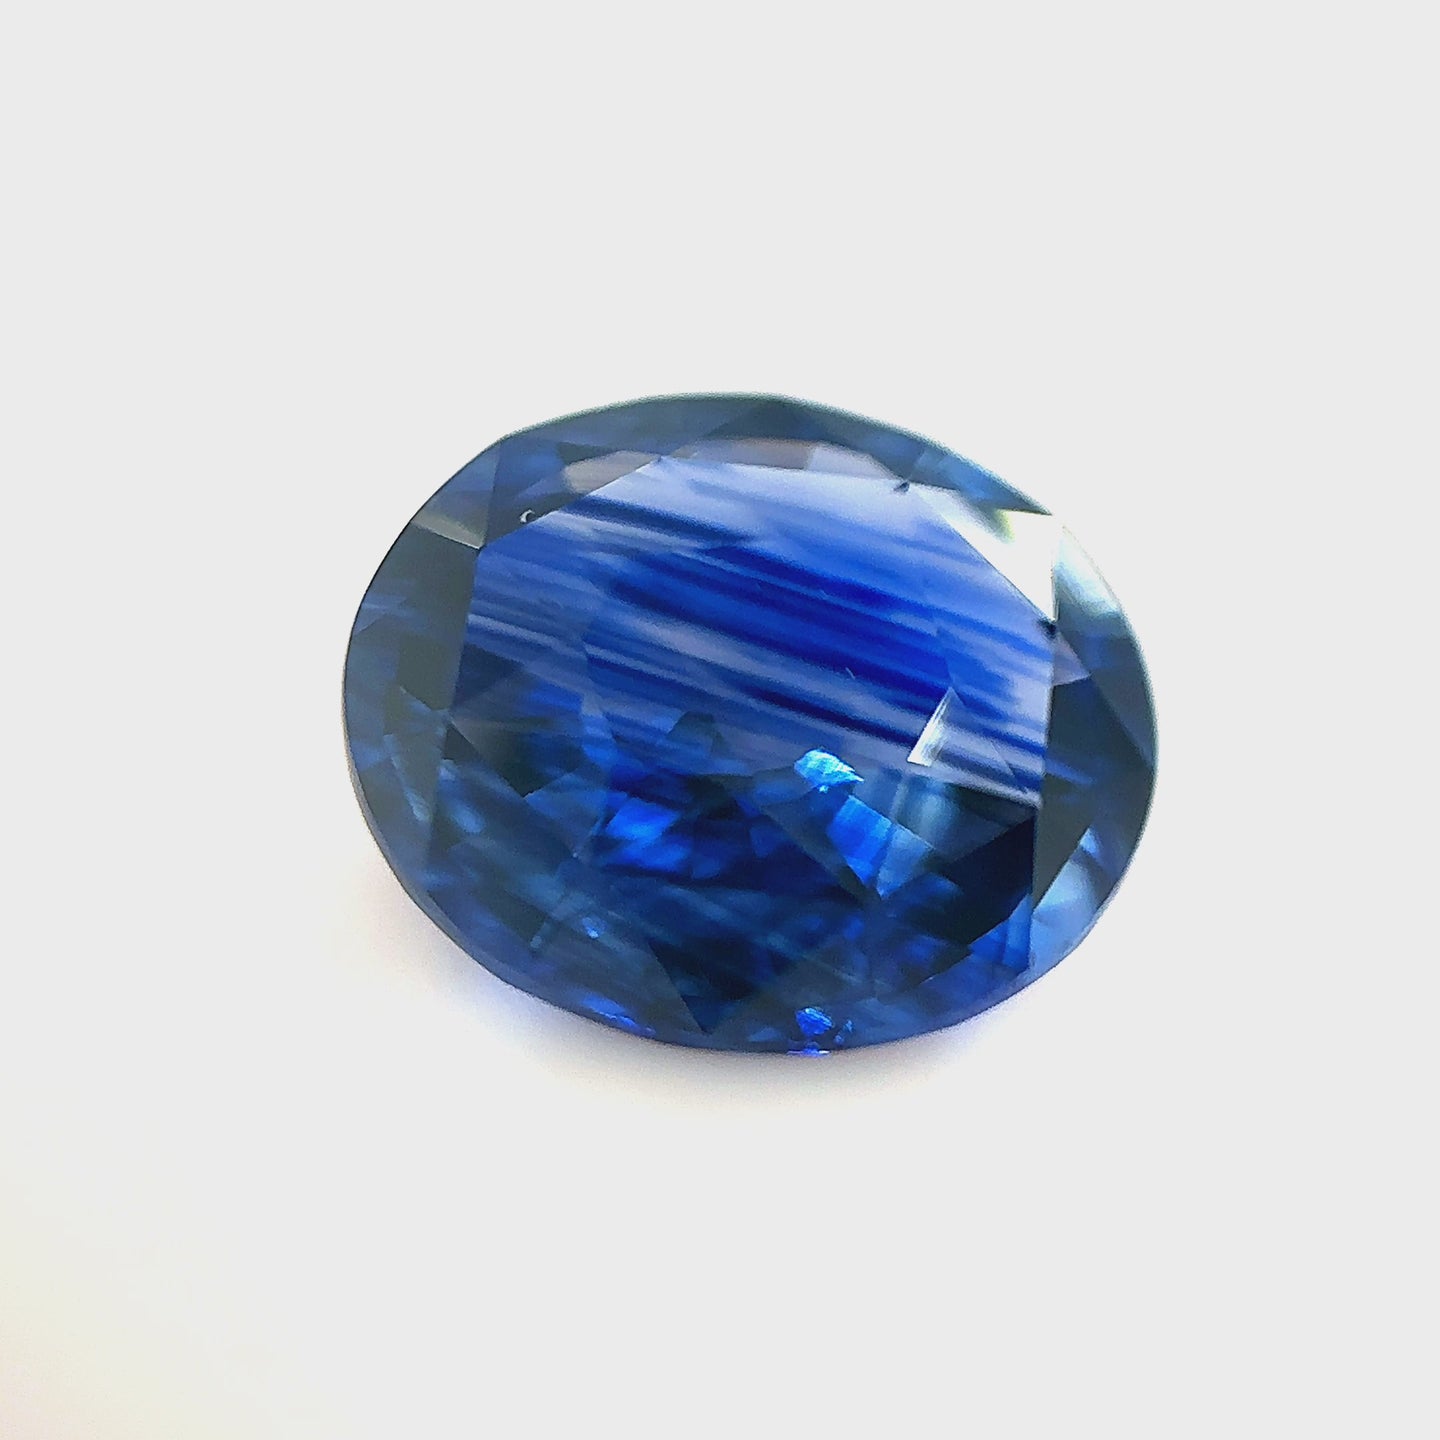 2.91ct. Unheated EGL Certified Oval Blue Sapphire